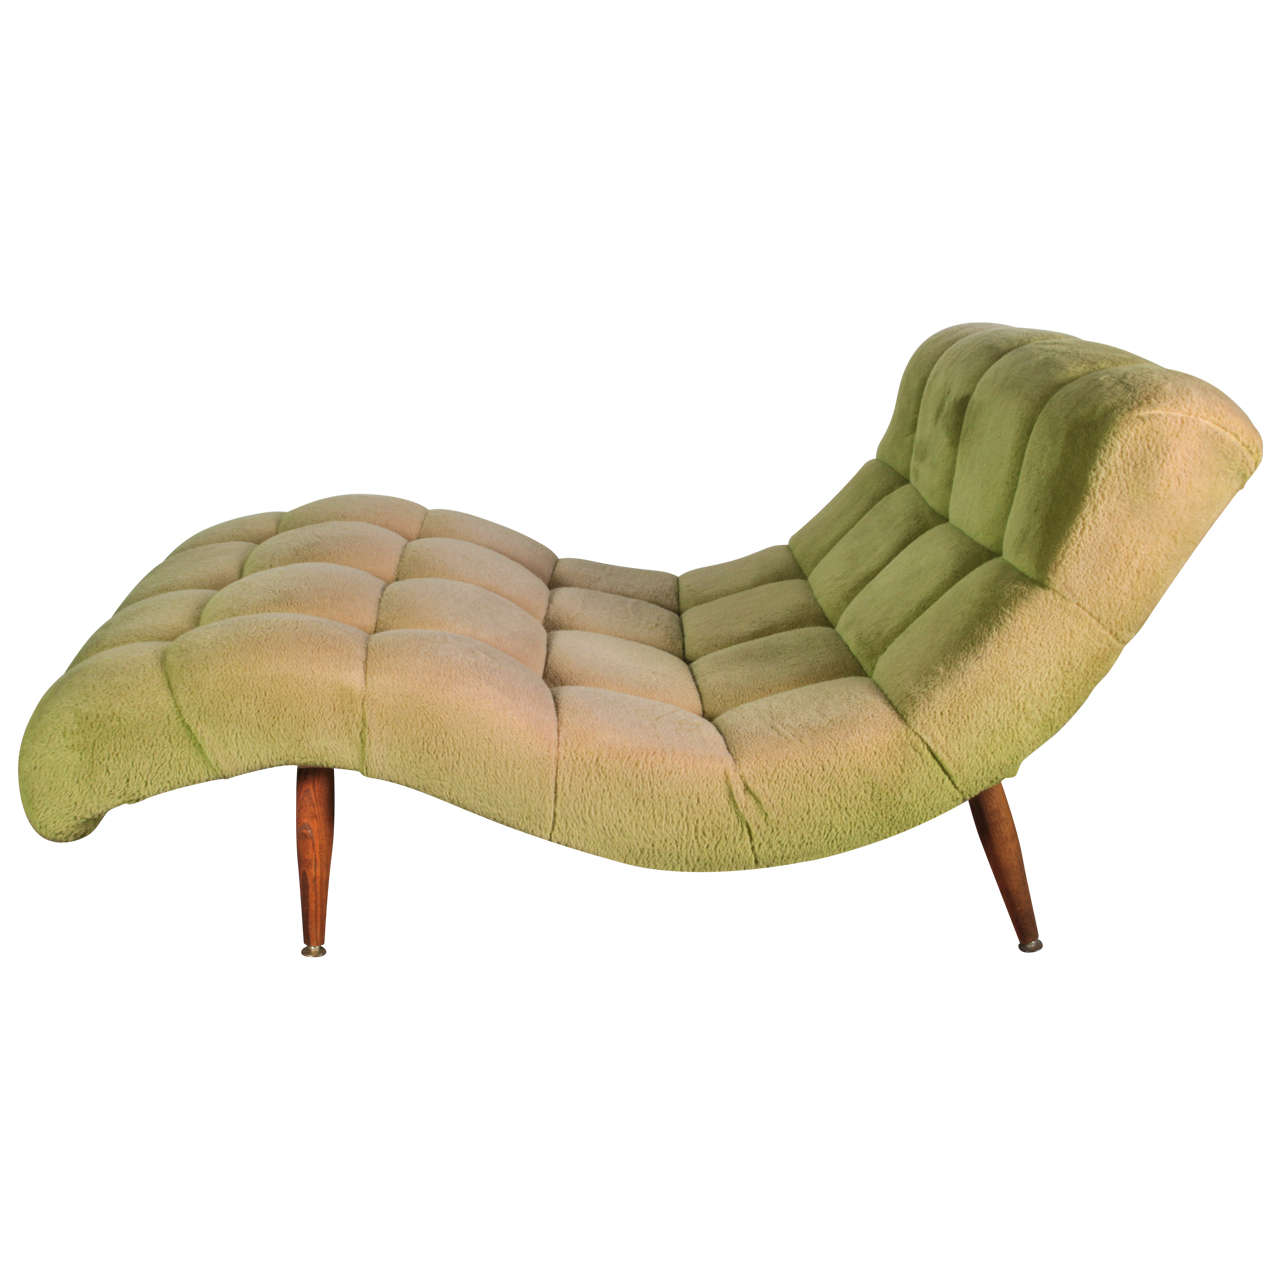 A Mid Century modern wave design loveseat / recamier in original high pile  pistachio color faux fur- attributed to Adrian Pearsall.
The tapered legs are oak and have functional levelers at the base for varied floor types. The seating is very